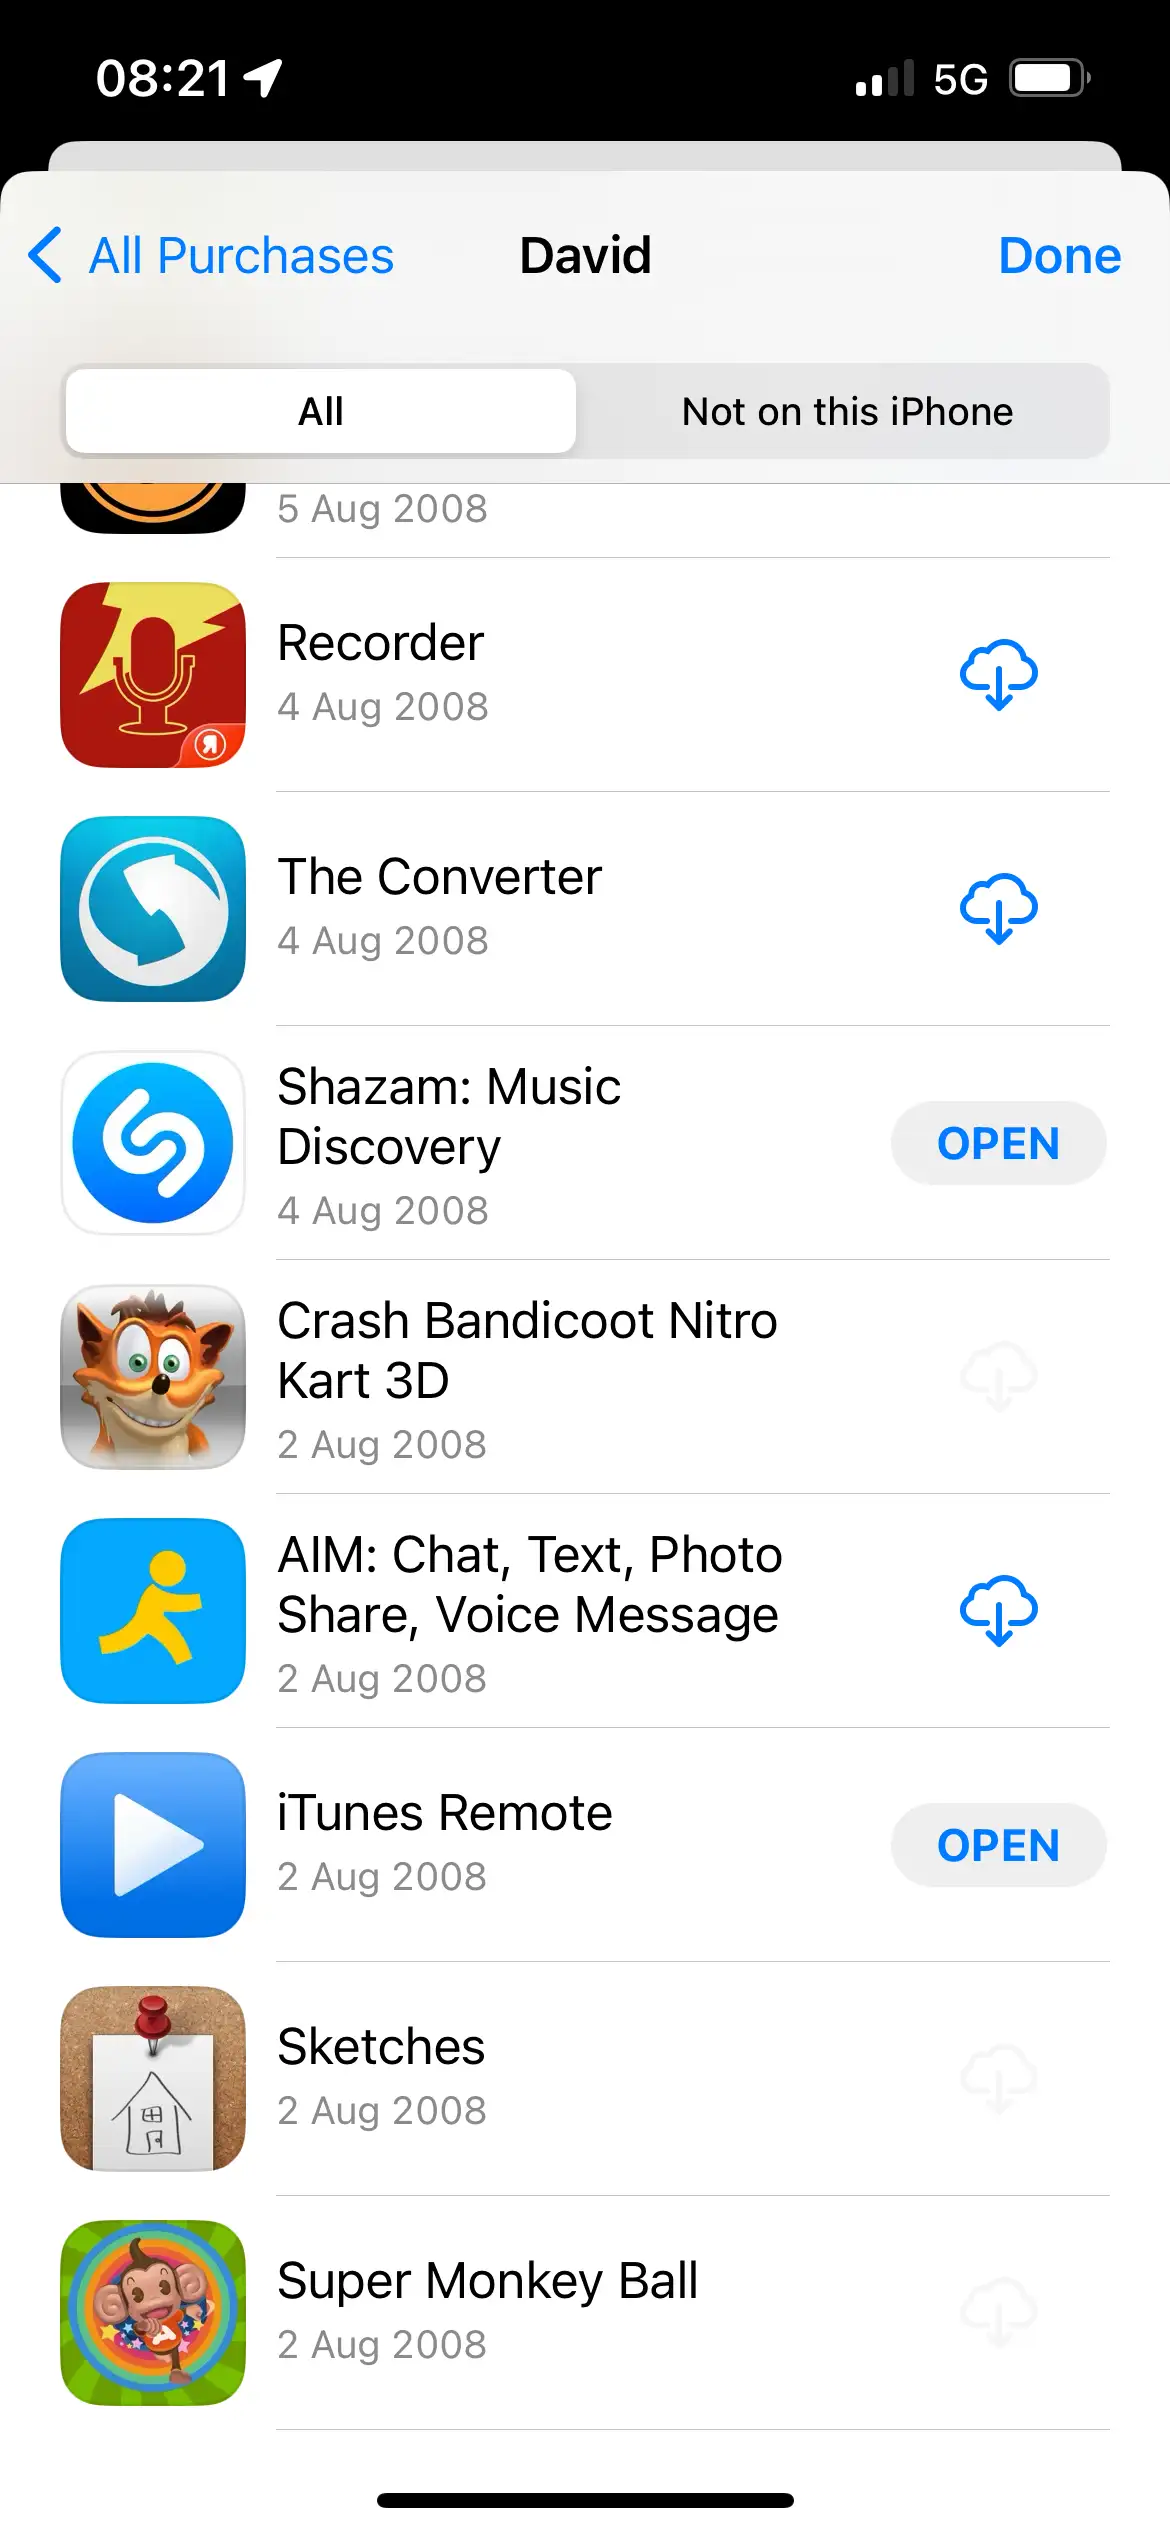 A screenshot of my first App Store purchase going back to Aug 2nd, 2008